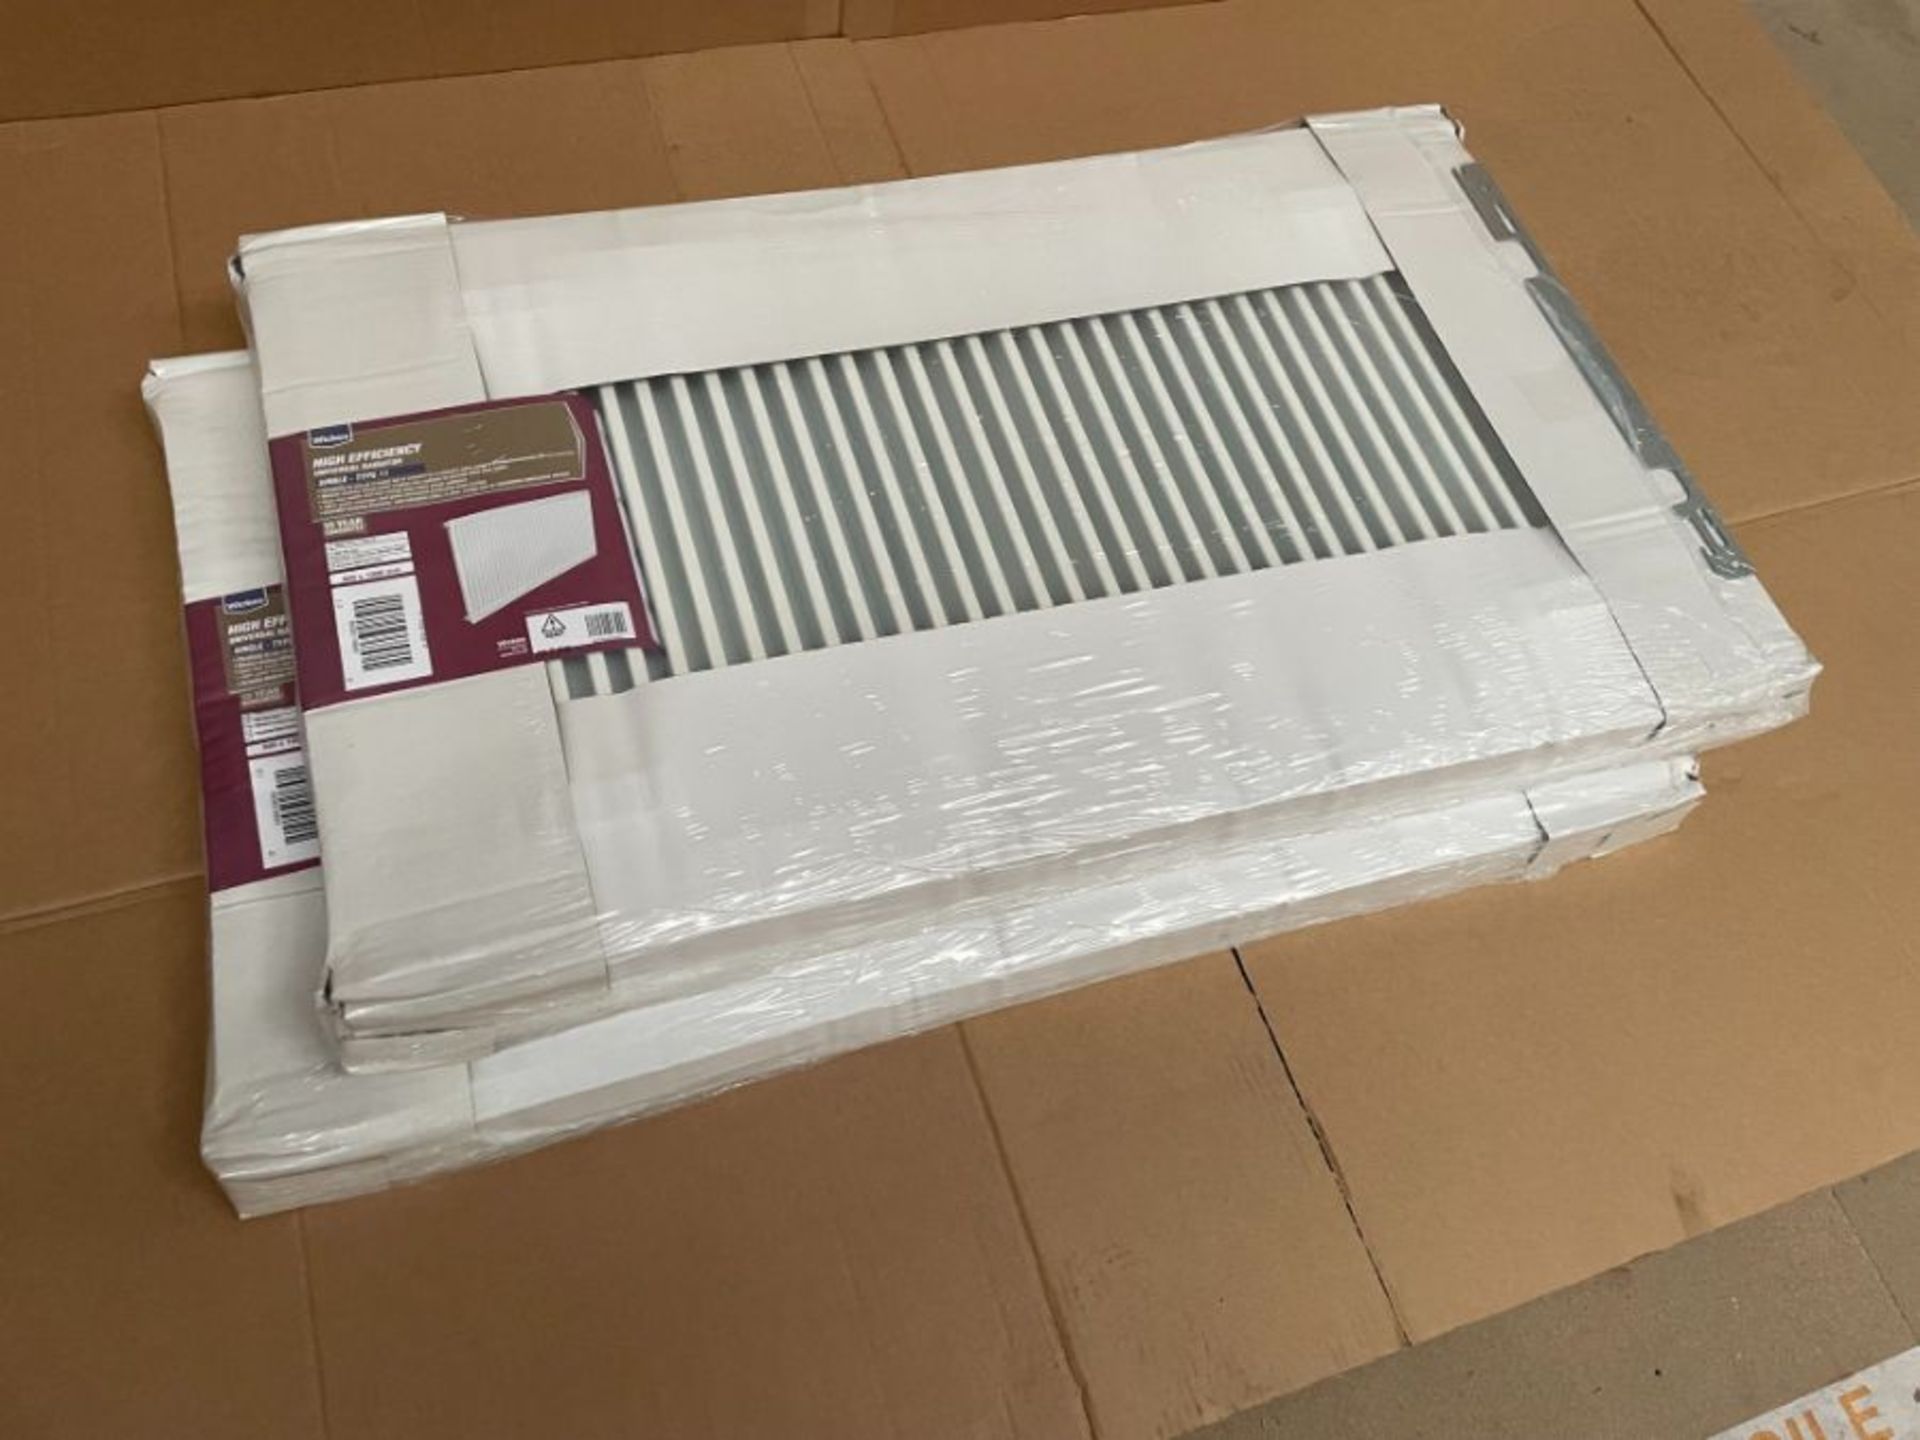 (2) x RADIATORS - (BRAND NEW) - H 600MM x W 1000MM T11 ROUND TOP (SINGLE) - MADE IN UK - SUPPLIED